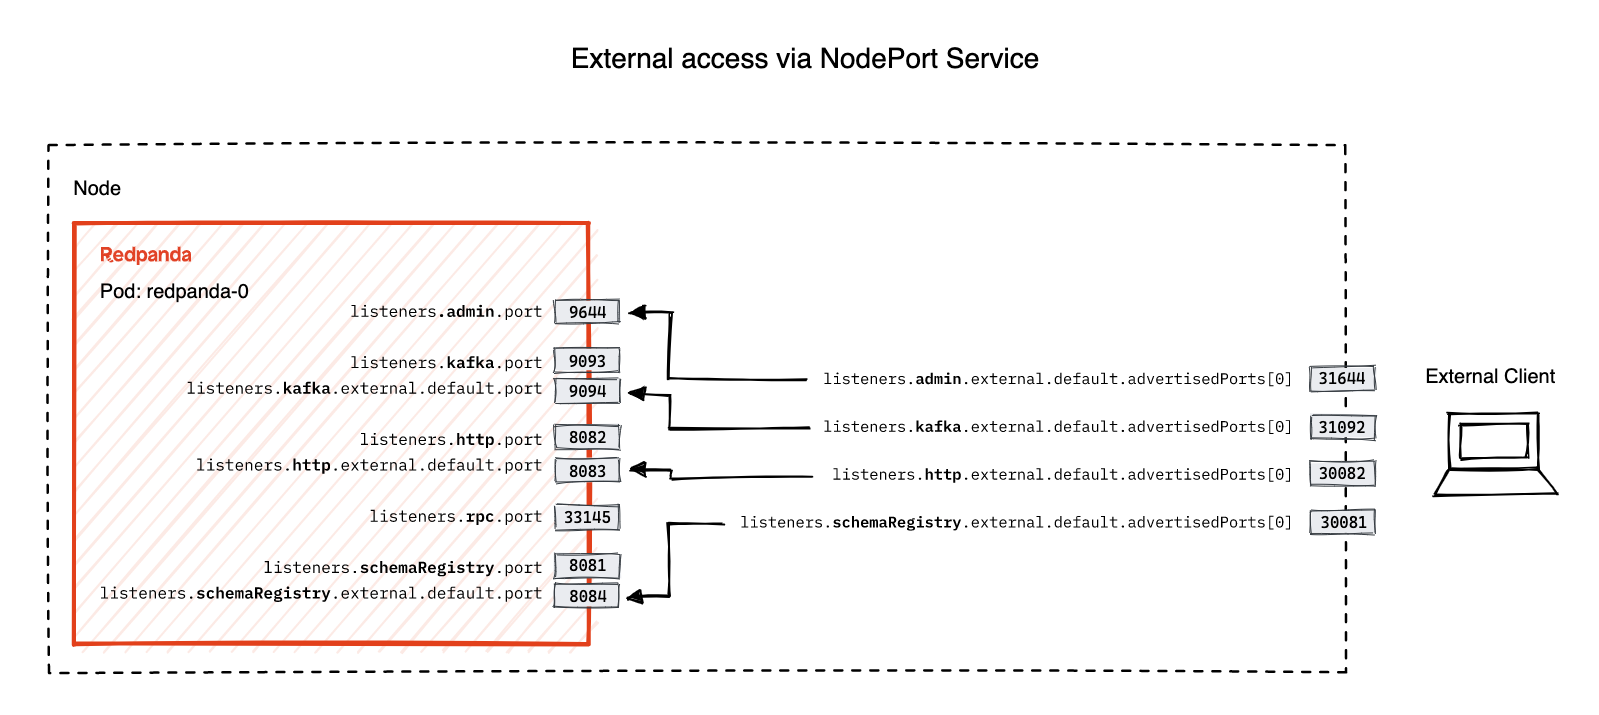 A client connects to a Pod through the NodePort Service